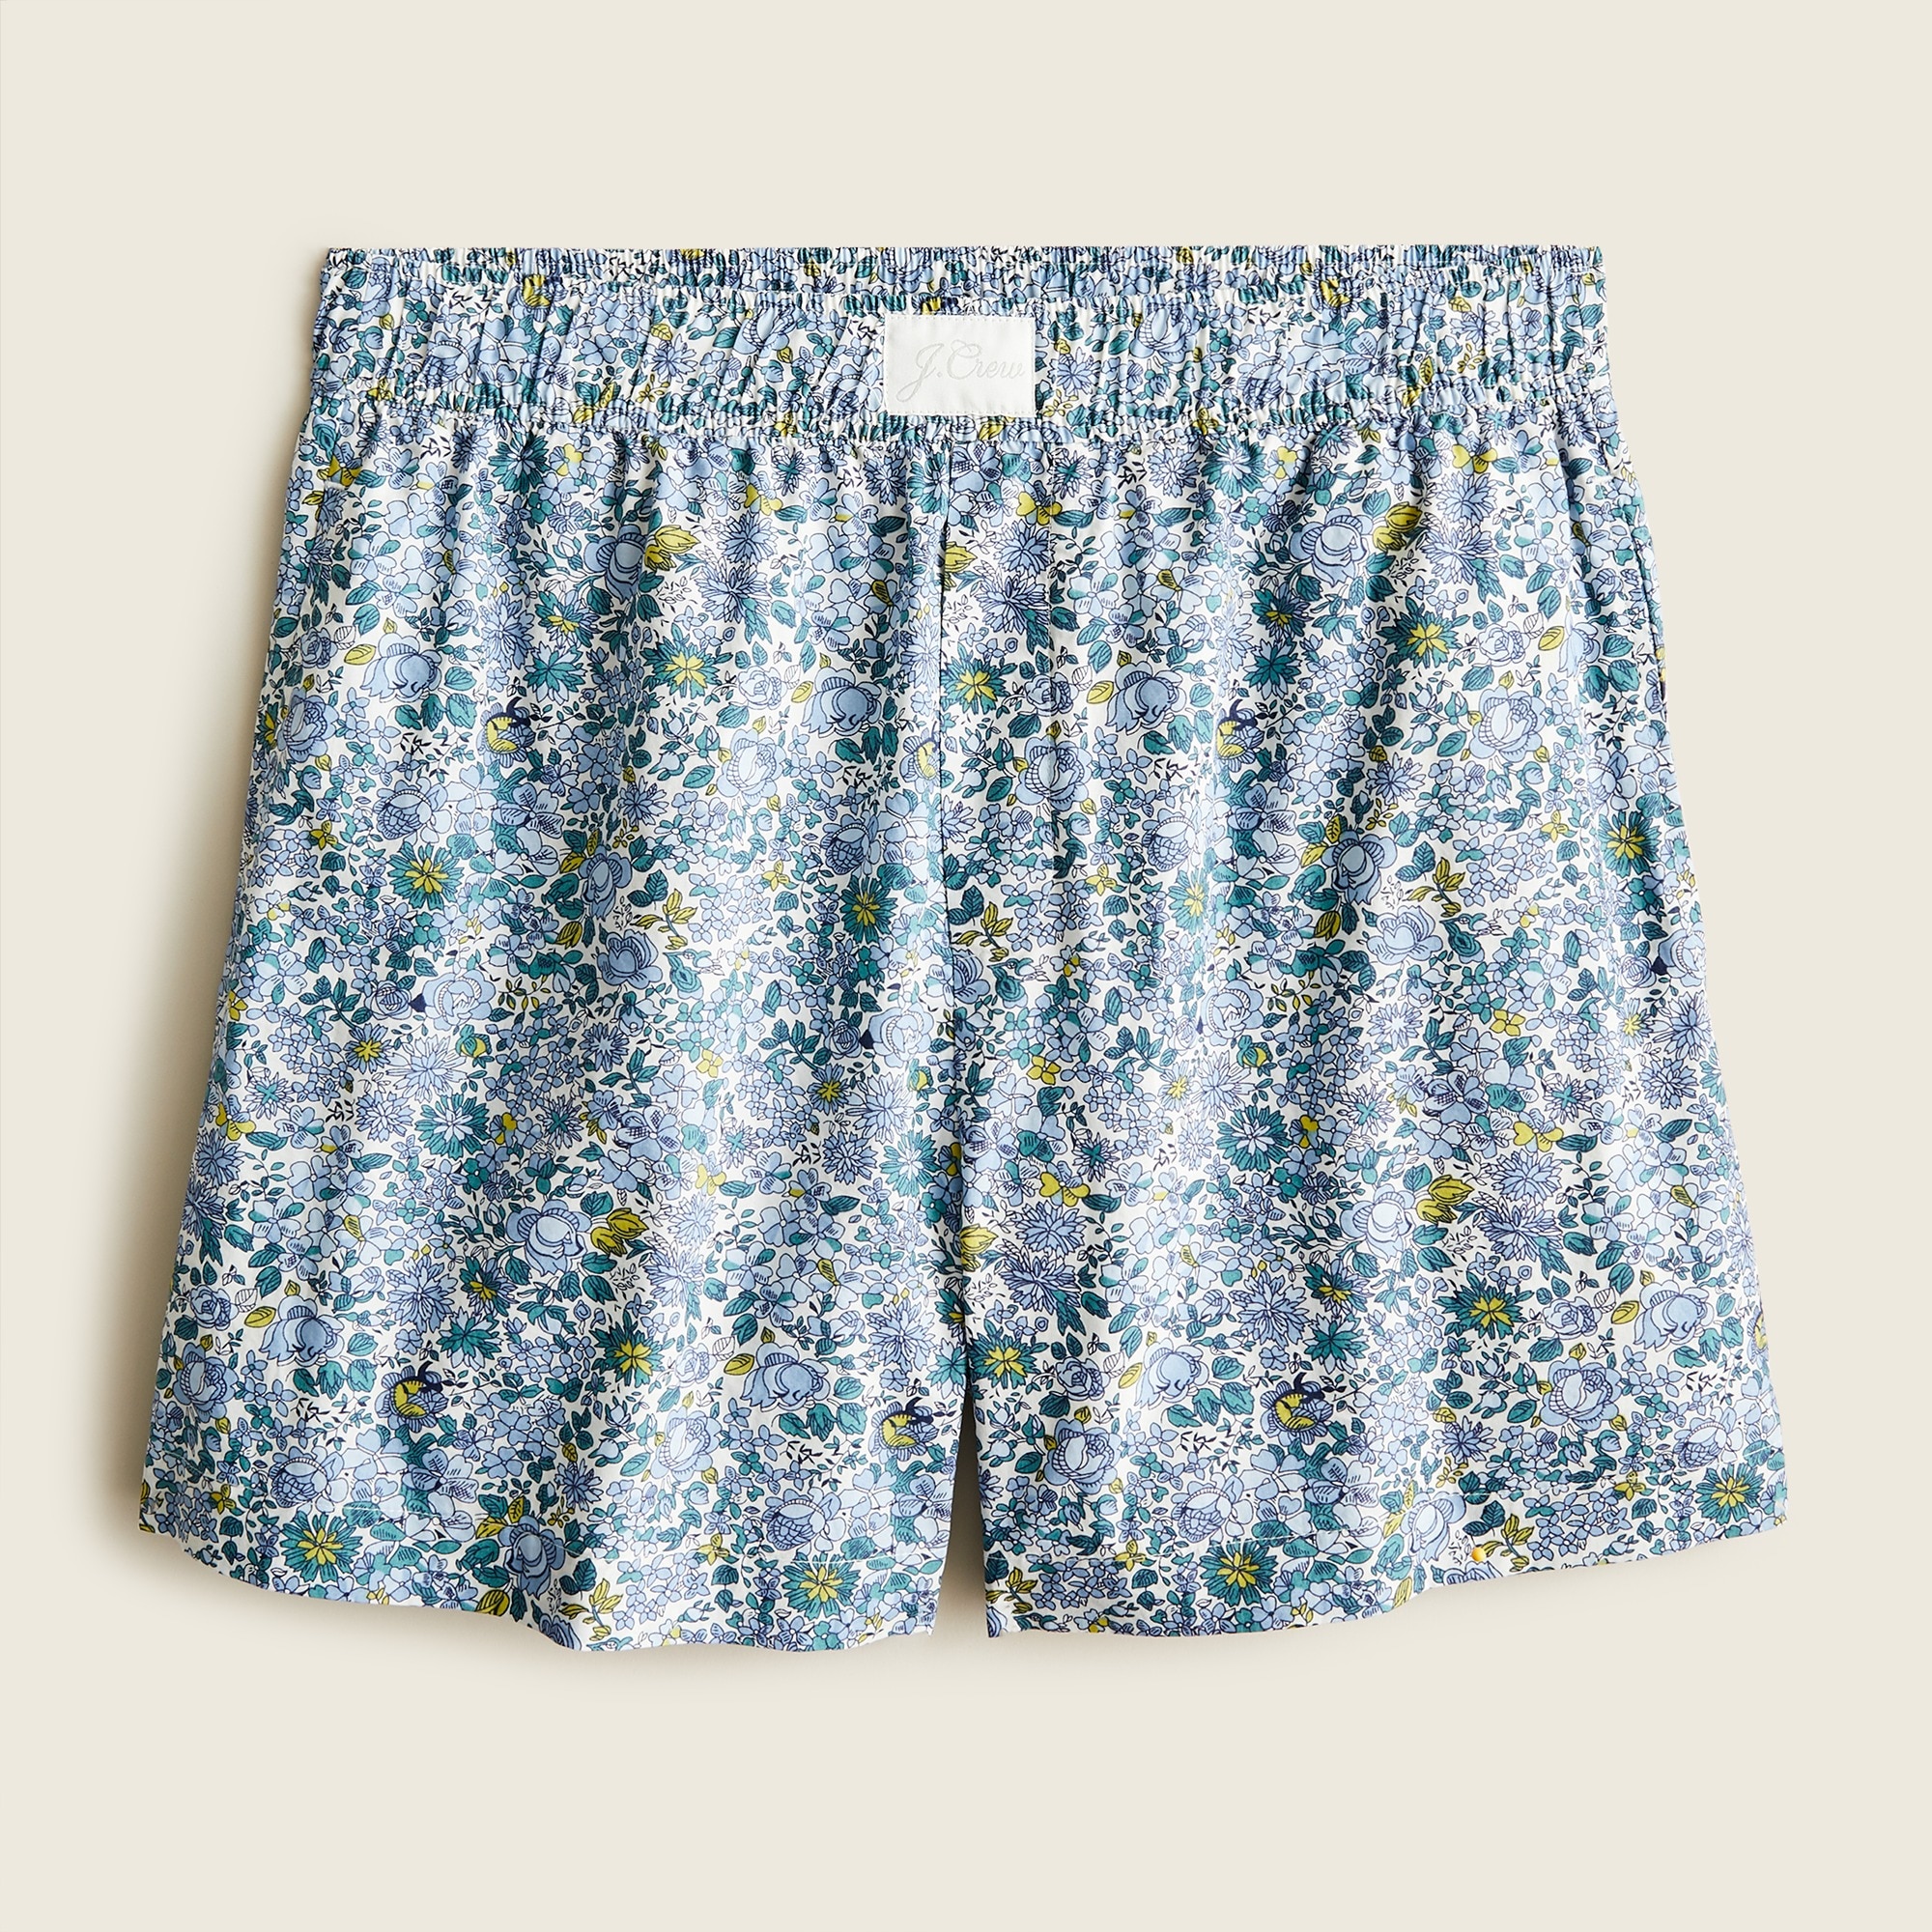 J.Crew: Cotton Poplin Boxer Short In Blooming Floral For Women